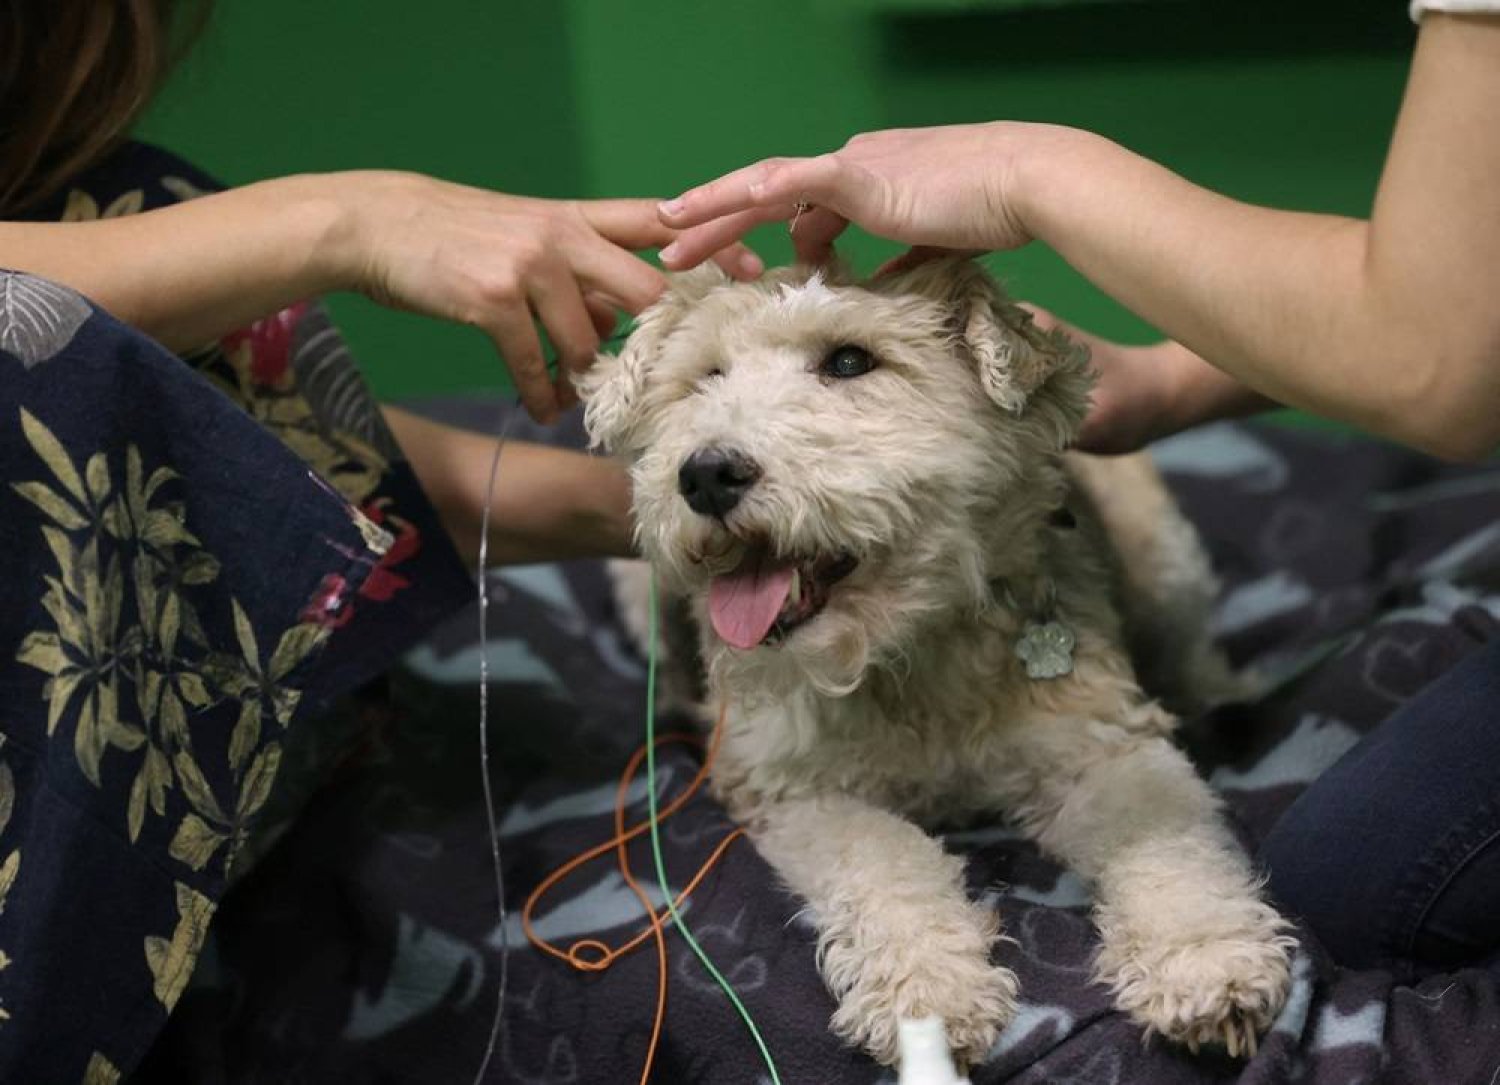 Owner Franciska Furik puts electroencephalography (EEG) electrodes on Cuki, a 12-year-old Fox Terrier, during a test that found dogs can associate words with objects, at the Ethology Department of the Eotvos Lorand University in Budapest, Hungary, March 27, 2024. (Reuters)